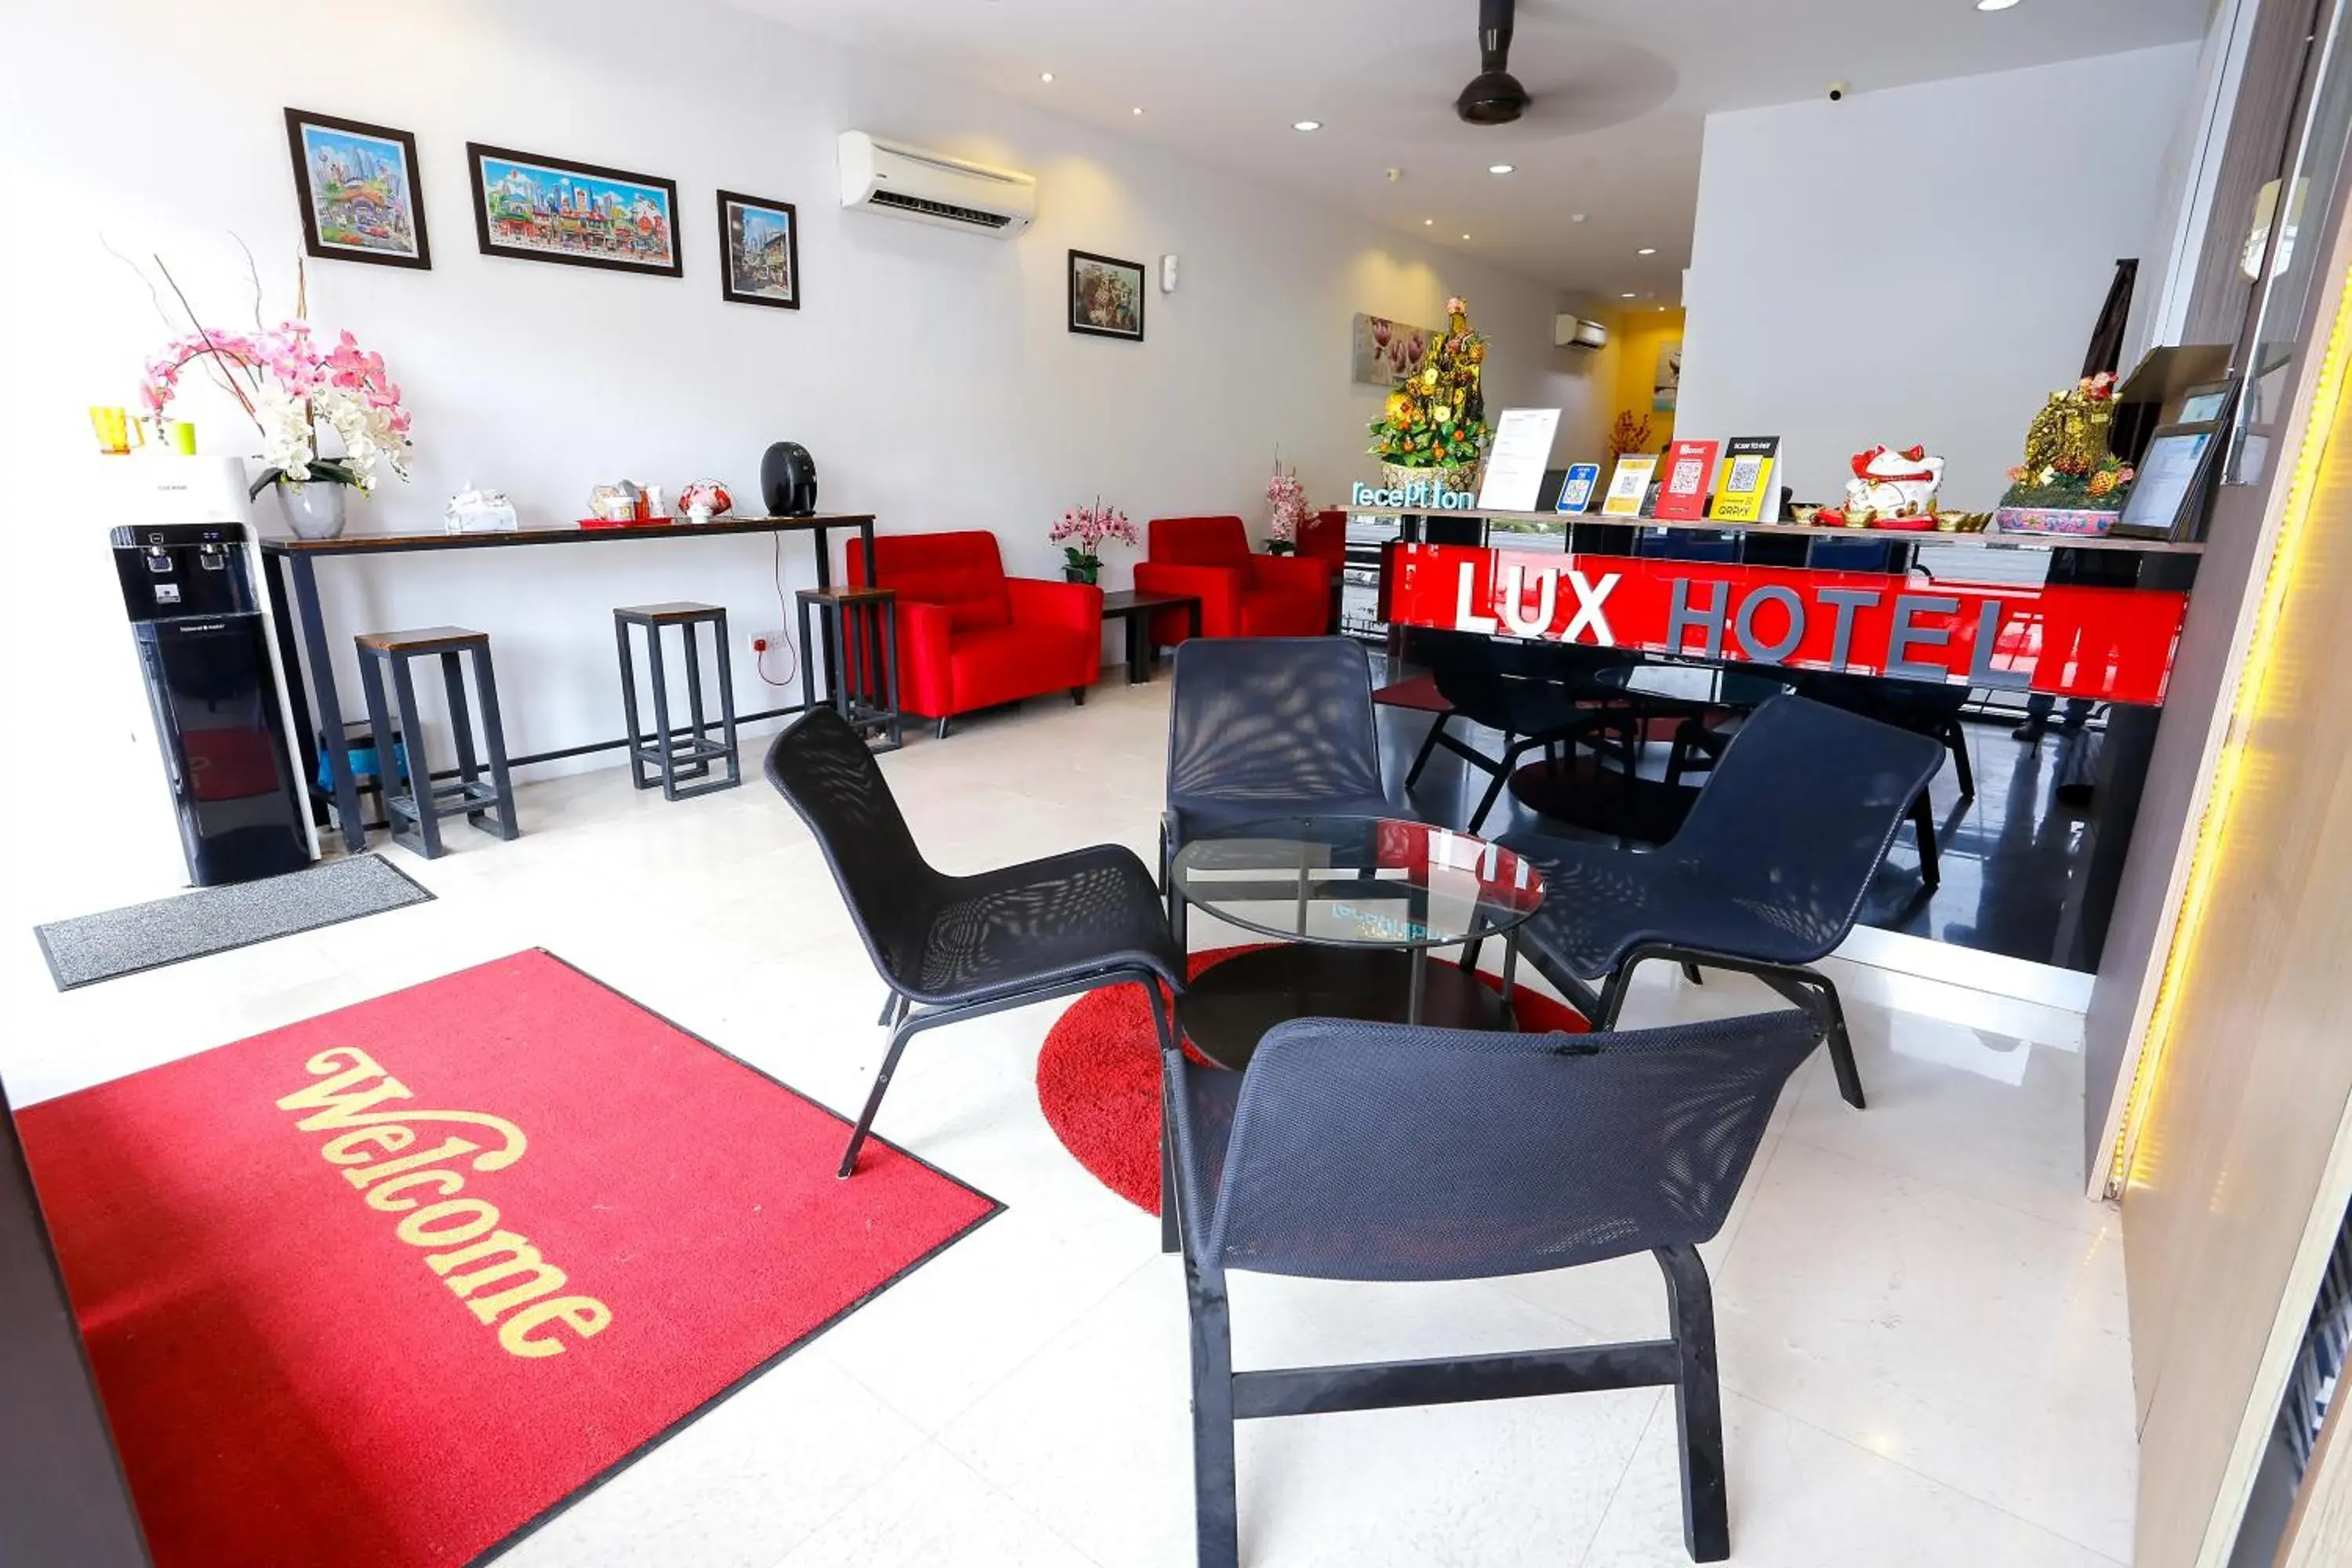 Lobby or reception in Lux Hotel